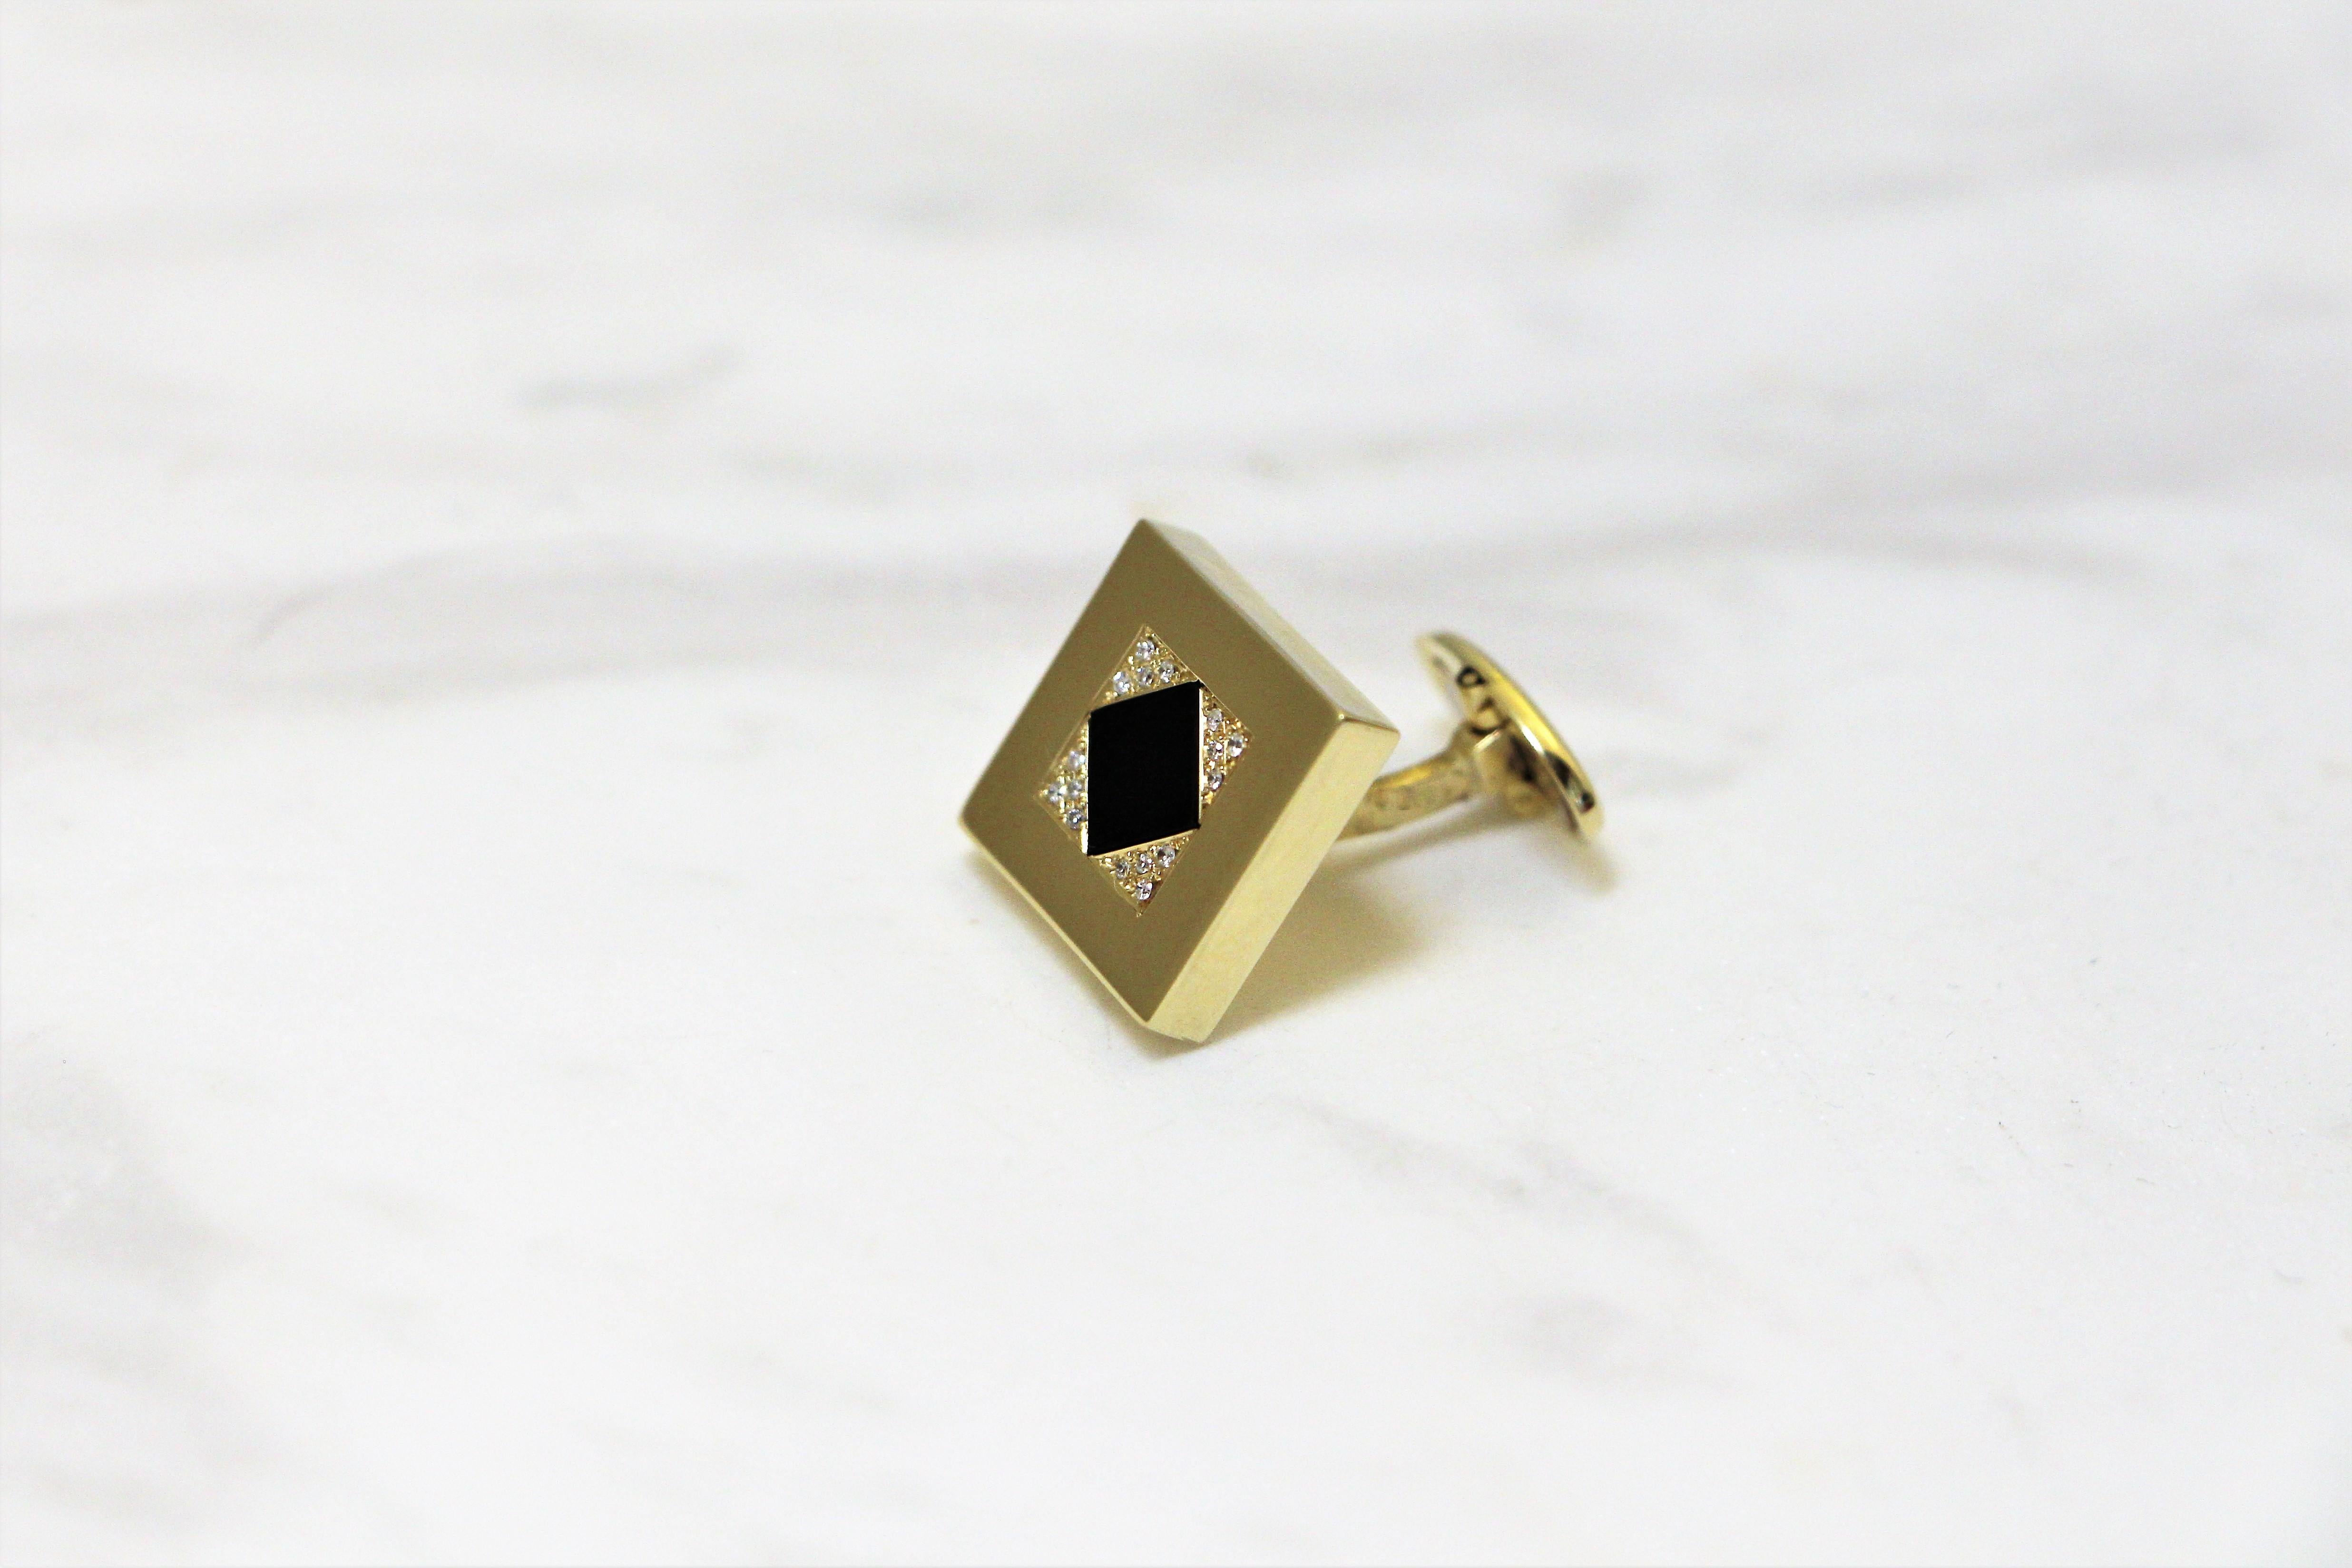 Square cufflinks handcrafted in 14Kt yellow gold featuring a rhombus black onyx centre and brilliant cut diamonds. The brilliant diamonds and the black onyx create a mesmerising play between light and shadow. These Cufflinks belong to Metalloplasies